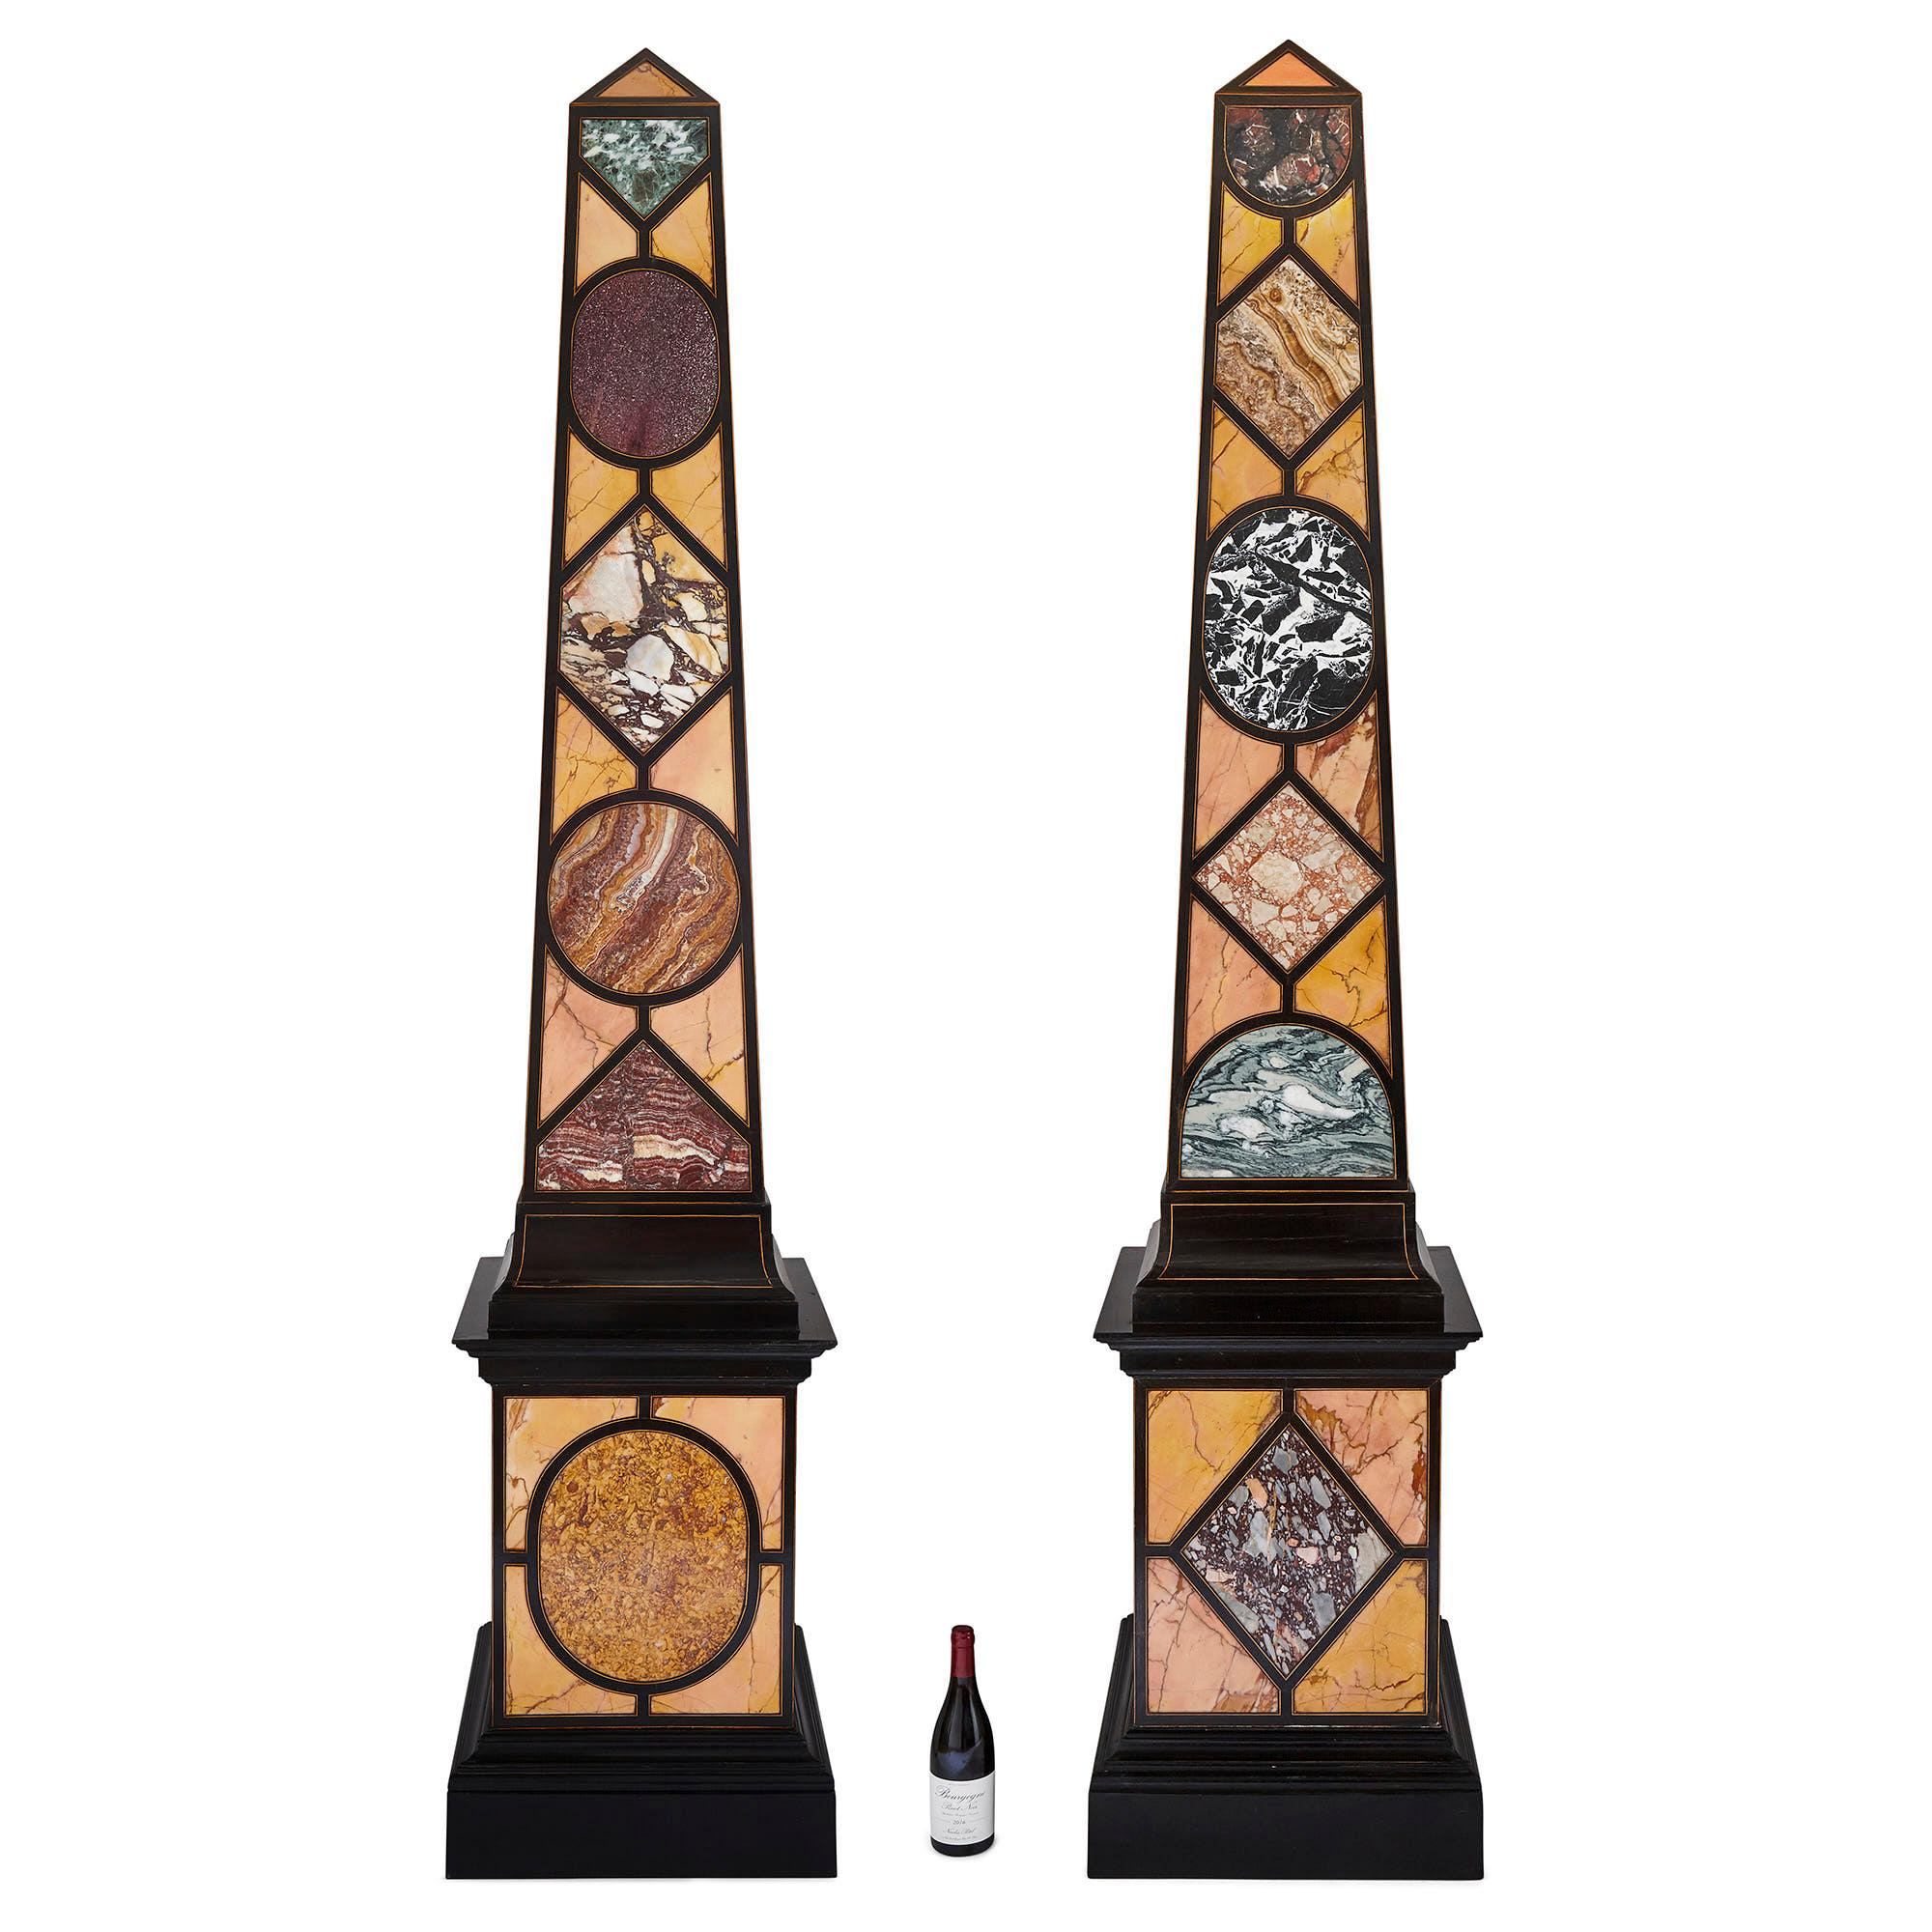 Pair of Egyptian Revival Italian specimen marble obelisks
Italian, 20th Century
Measures: Height 262cm, width 54cm, depth 54cm

The obelisks in this pair are superb demonstrations of native Italian marbles, with specimens including verde antico,